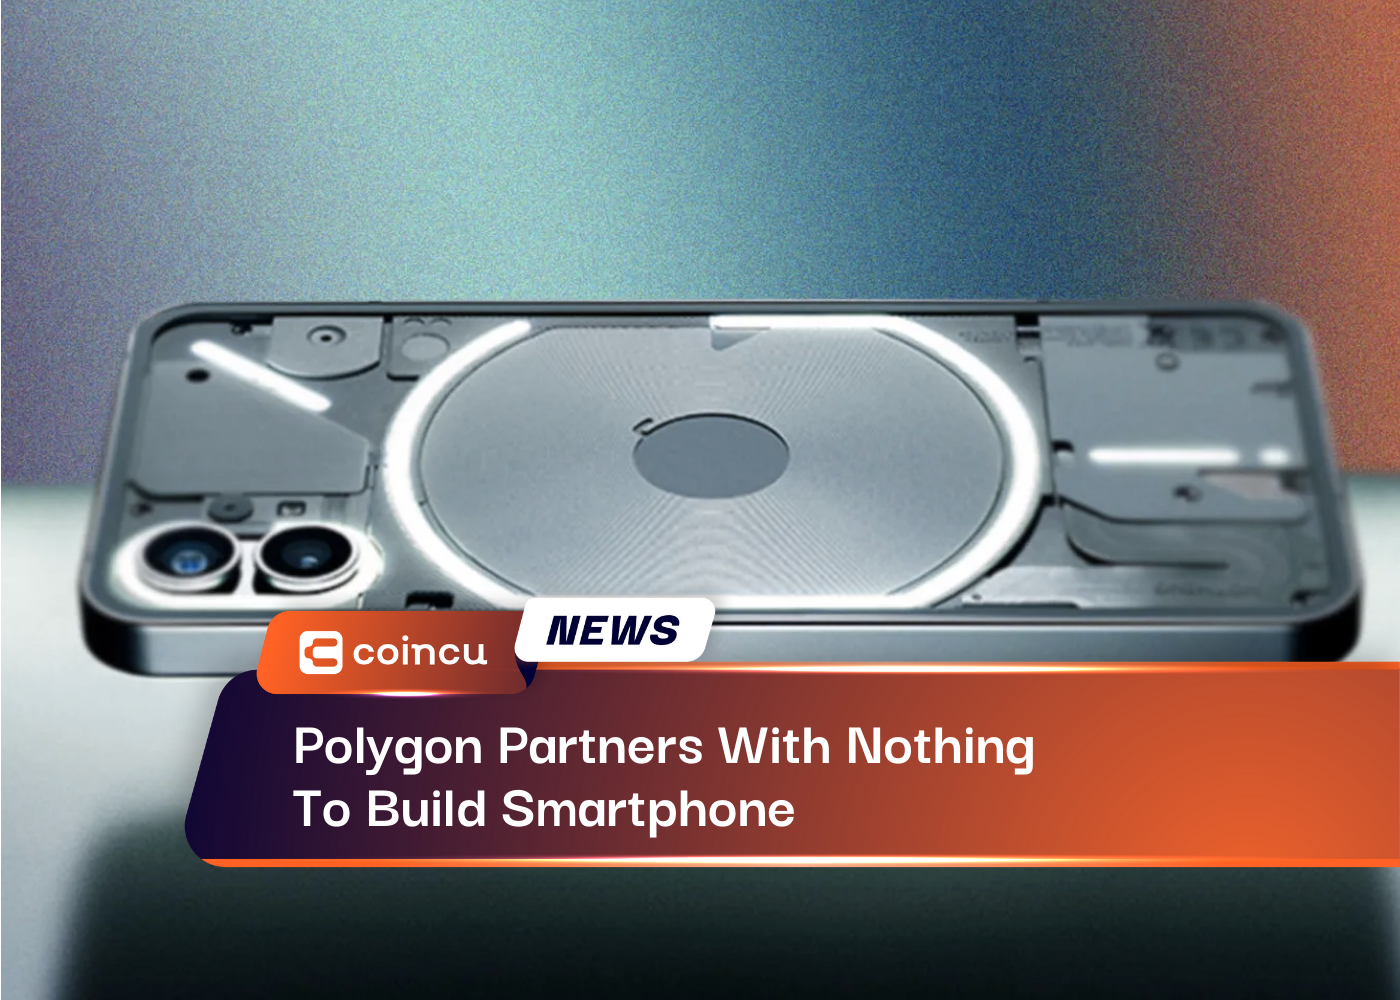 Polygon Partners With Nothing To Build Smartphone